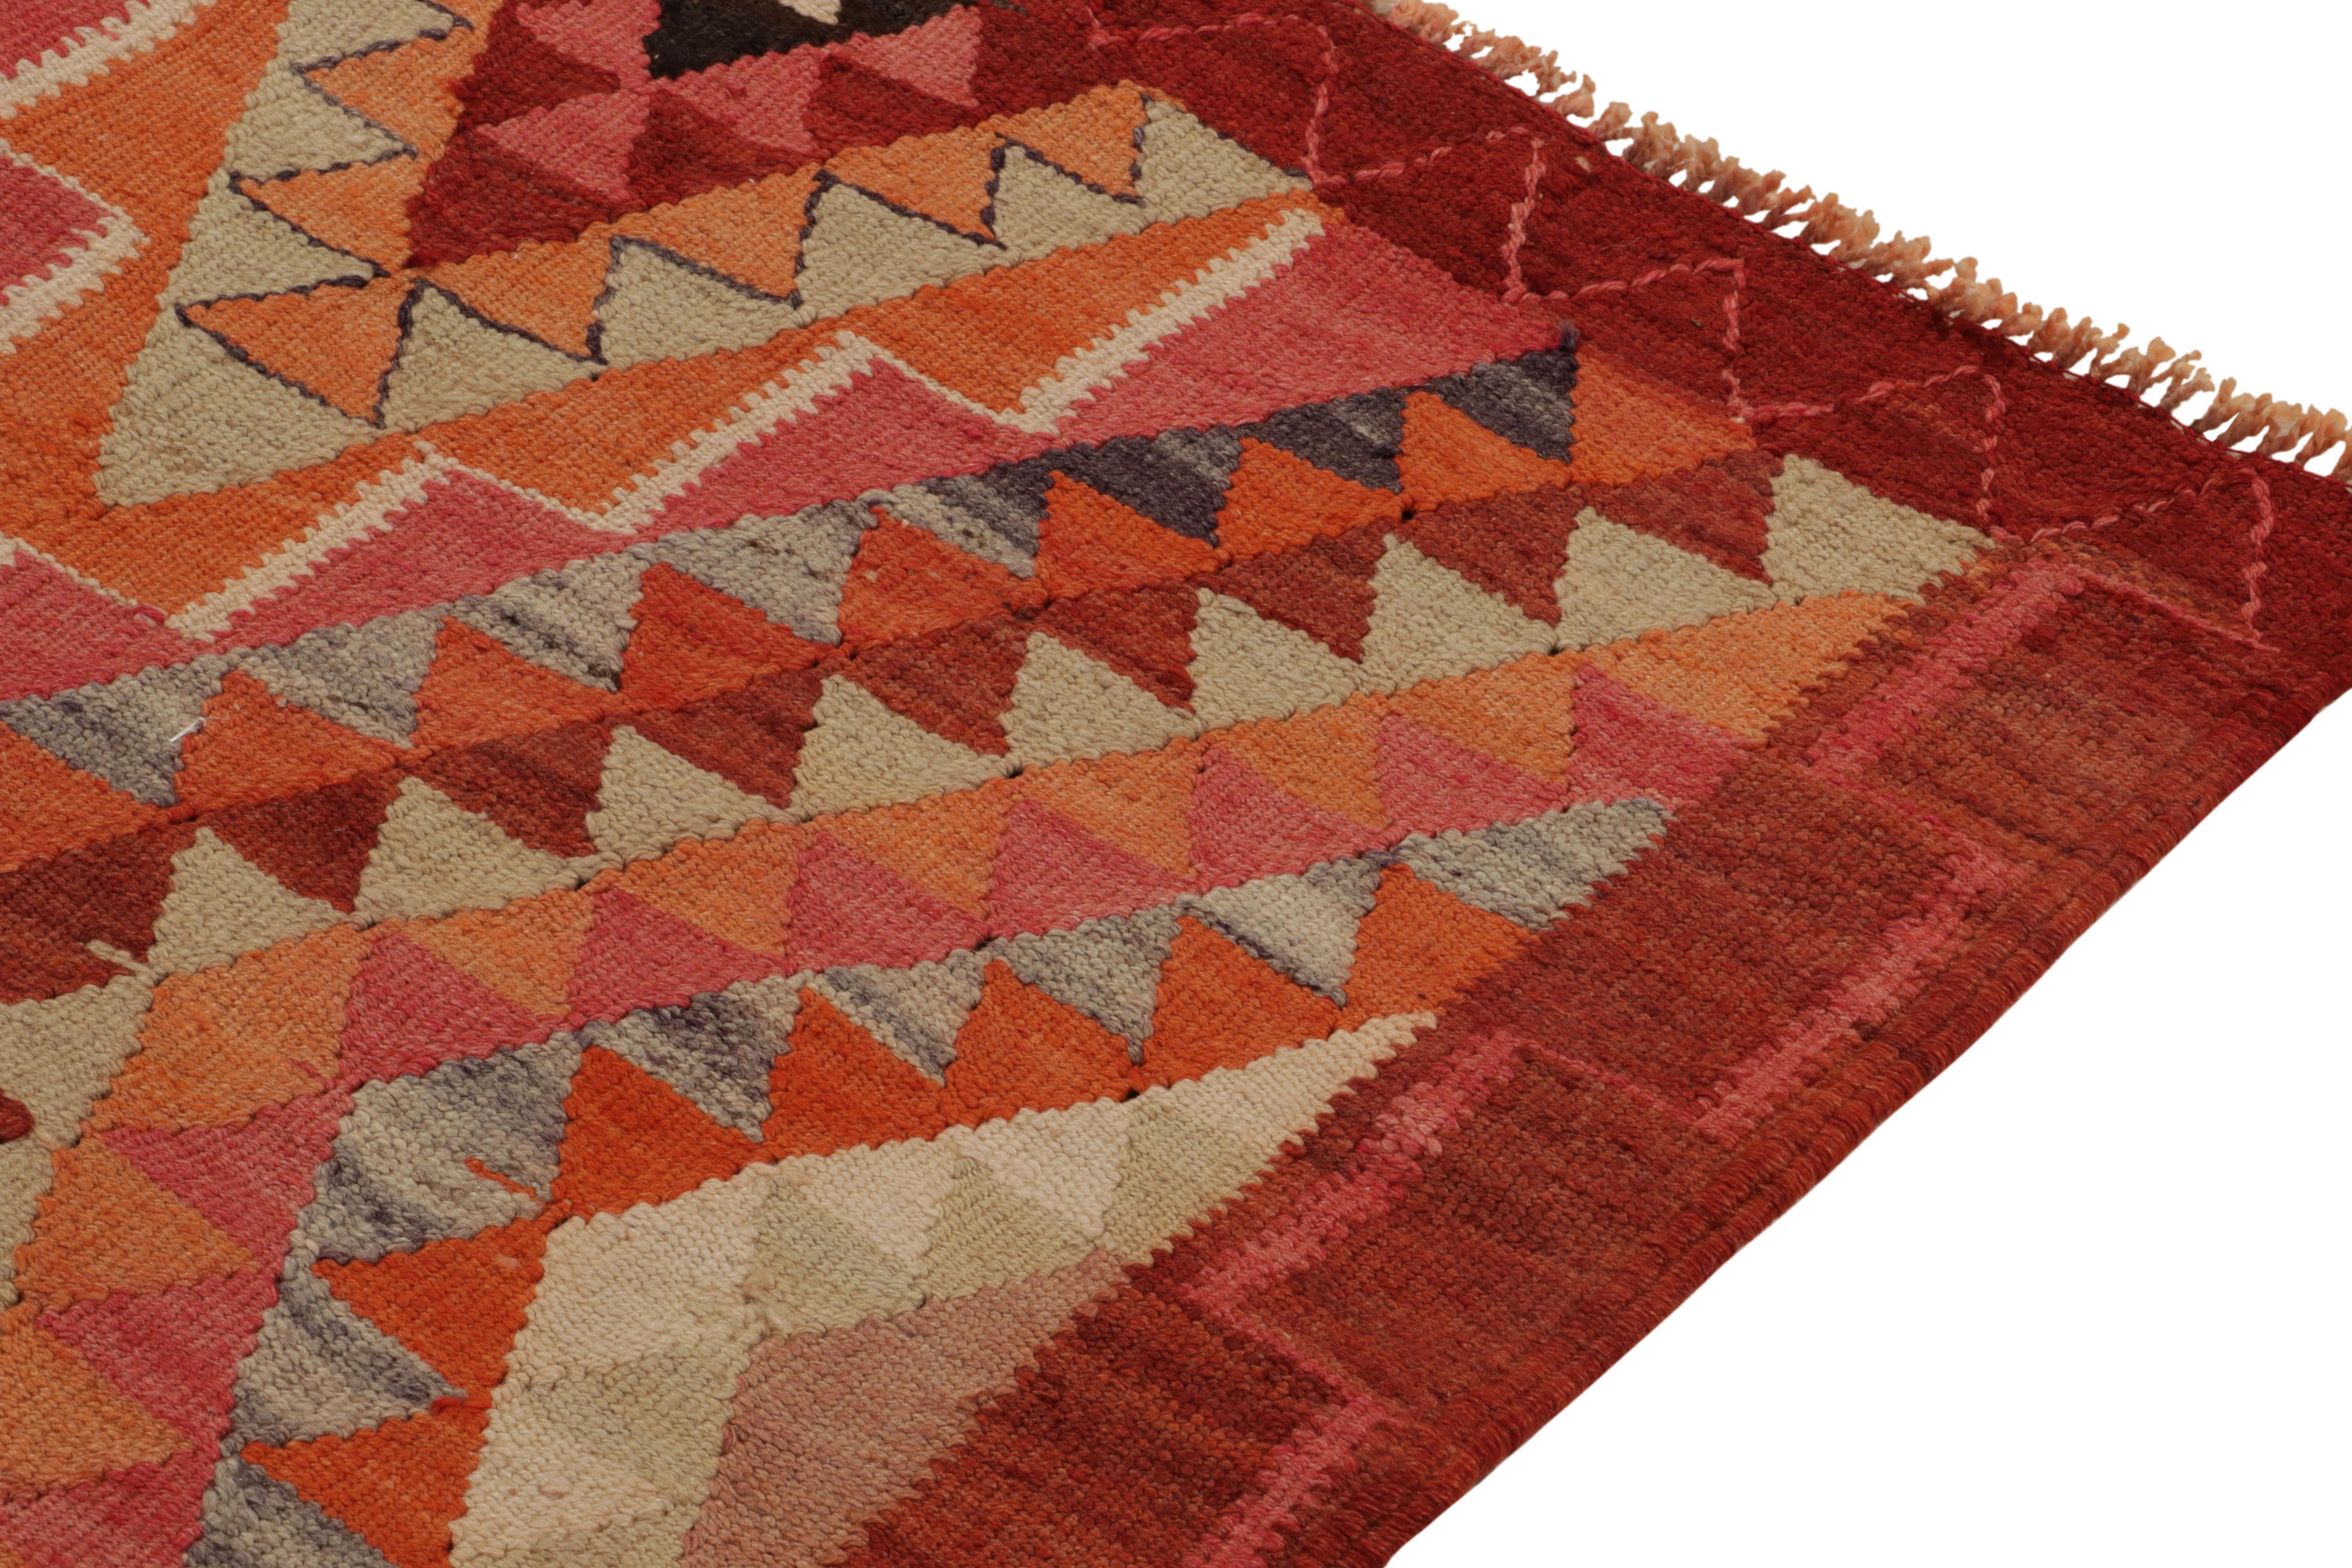 Vintage Tribal Kilim Runner in Red Brown Orange Geometric Pattern by Rug & Kilim In Good Condition For Sale In Long Island City, NY